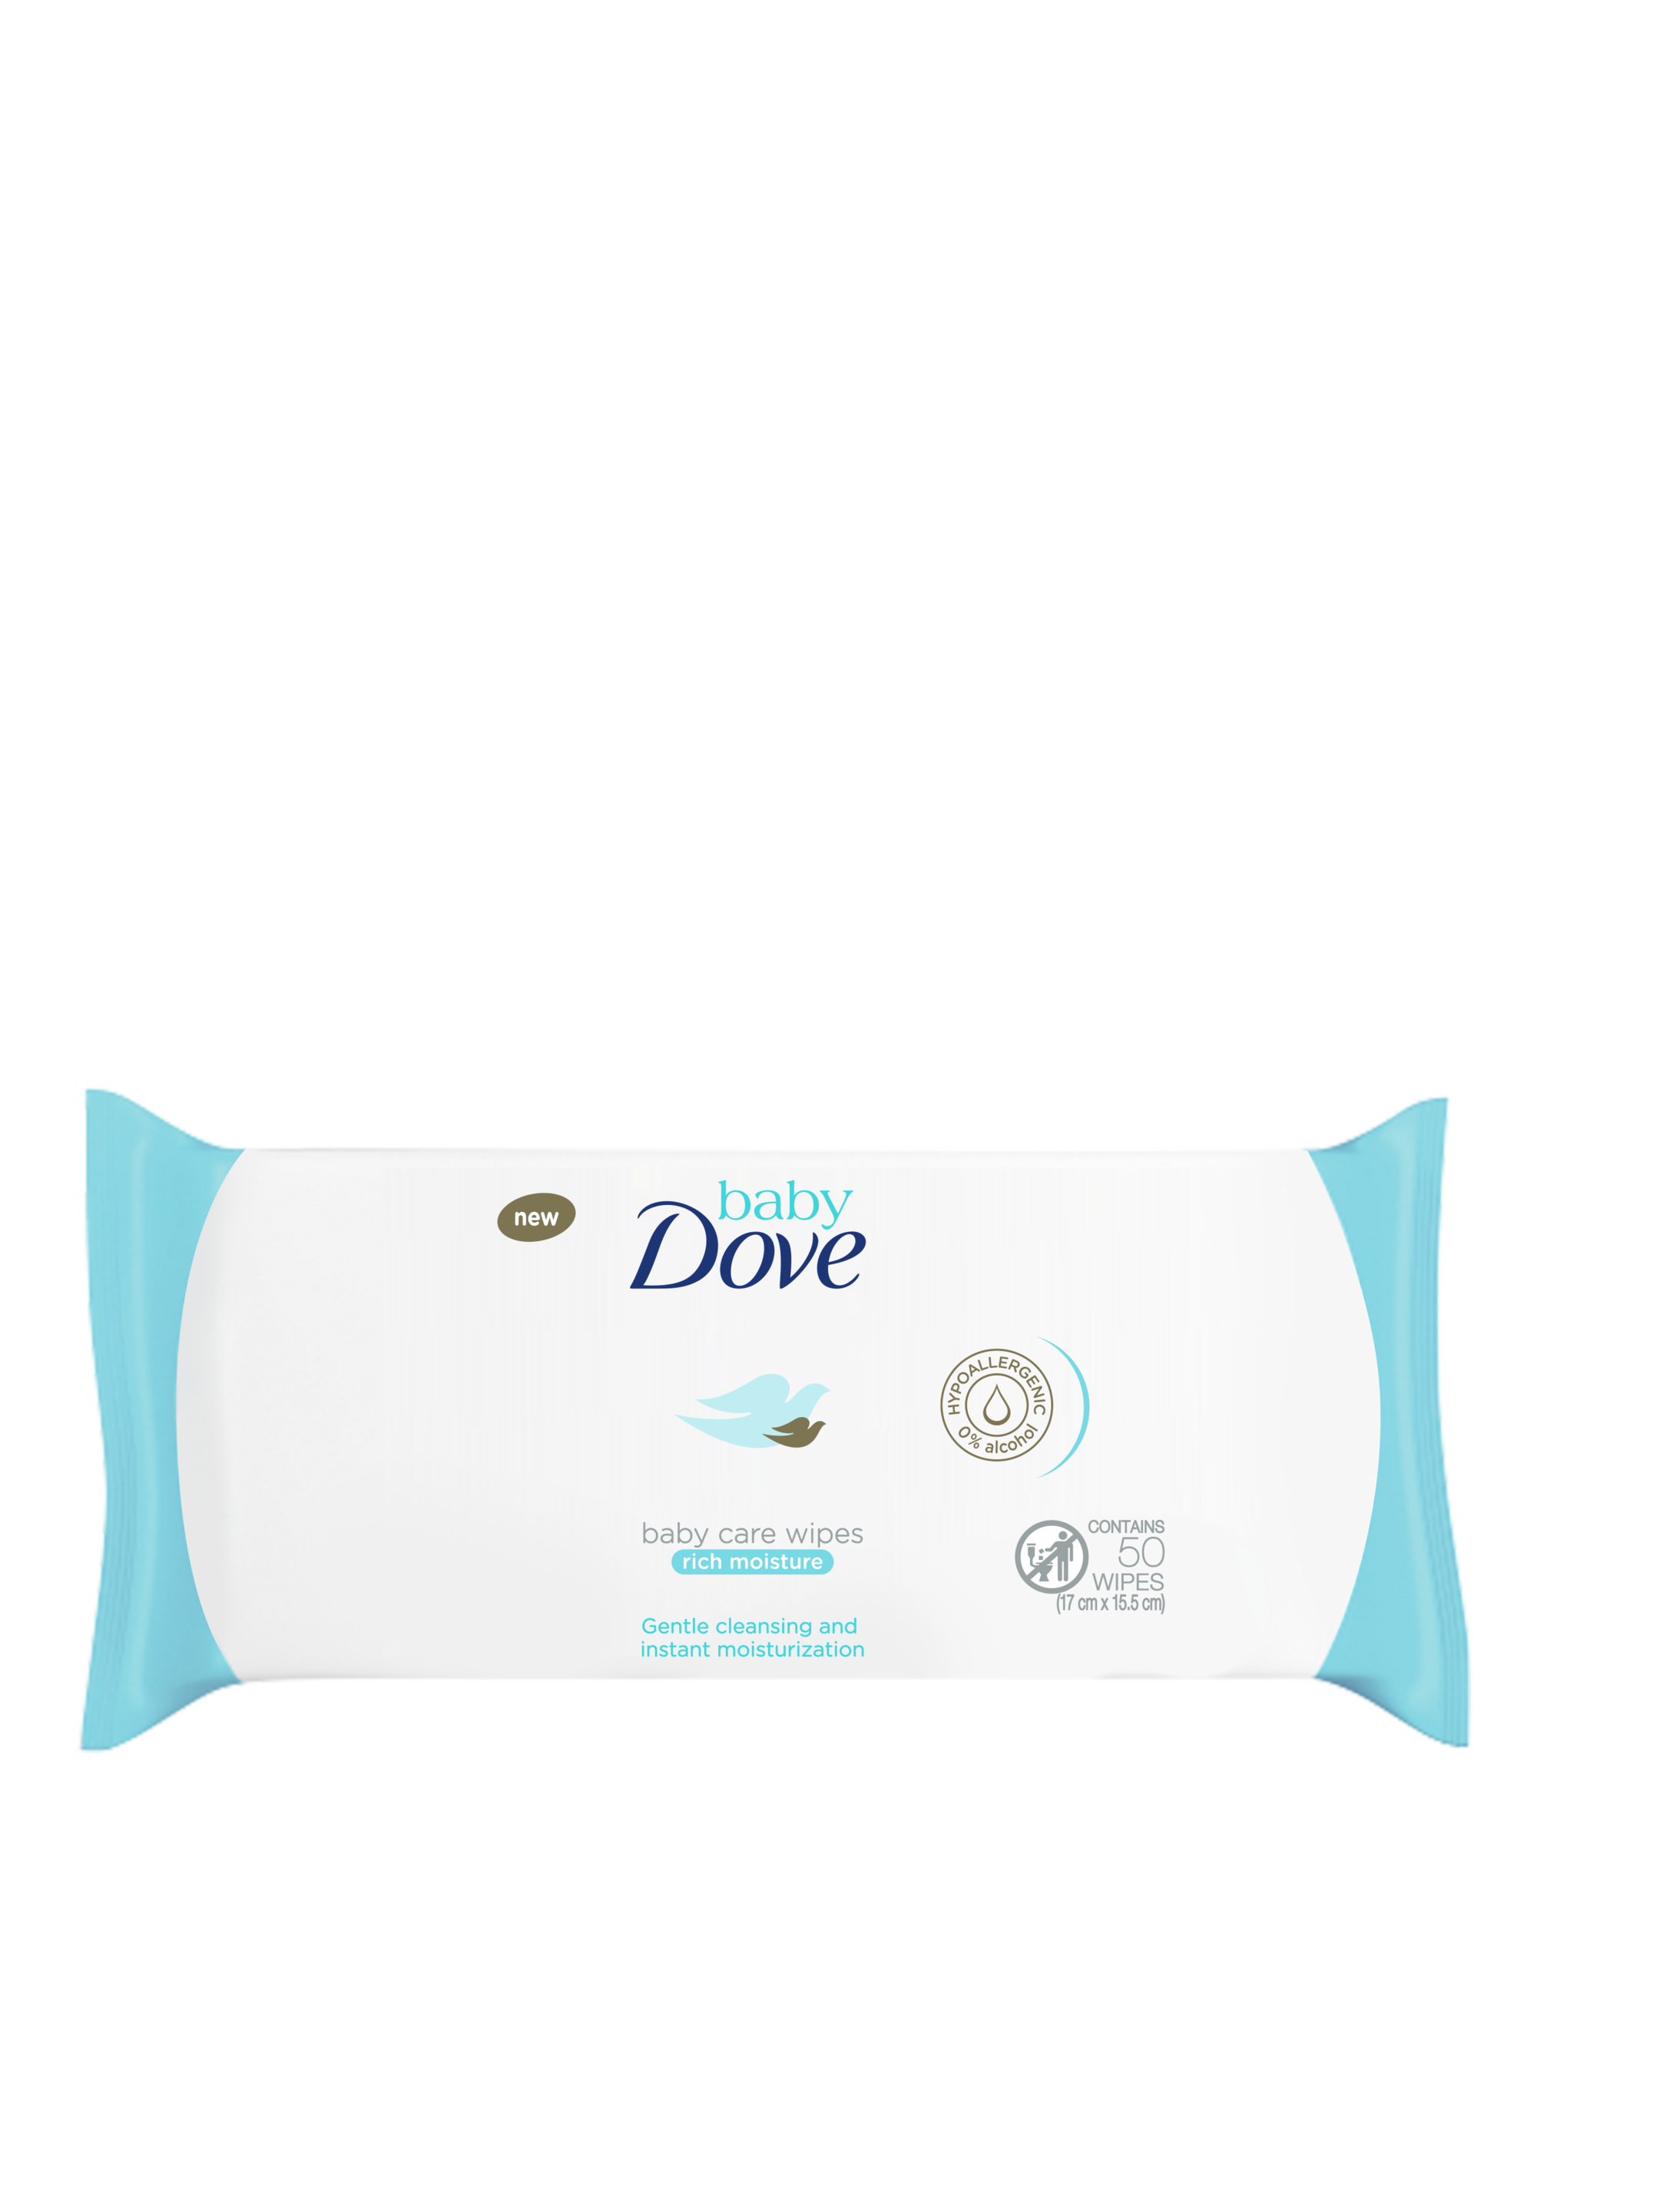 Baby Dove Baby Care Wipes Rich Moisture 50 pulls